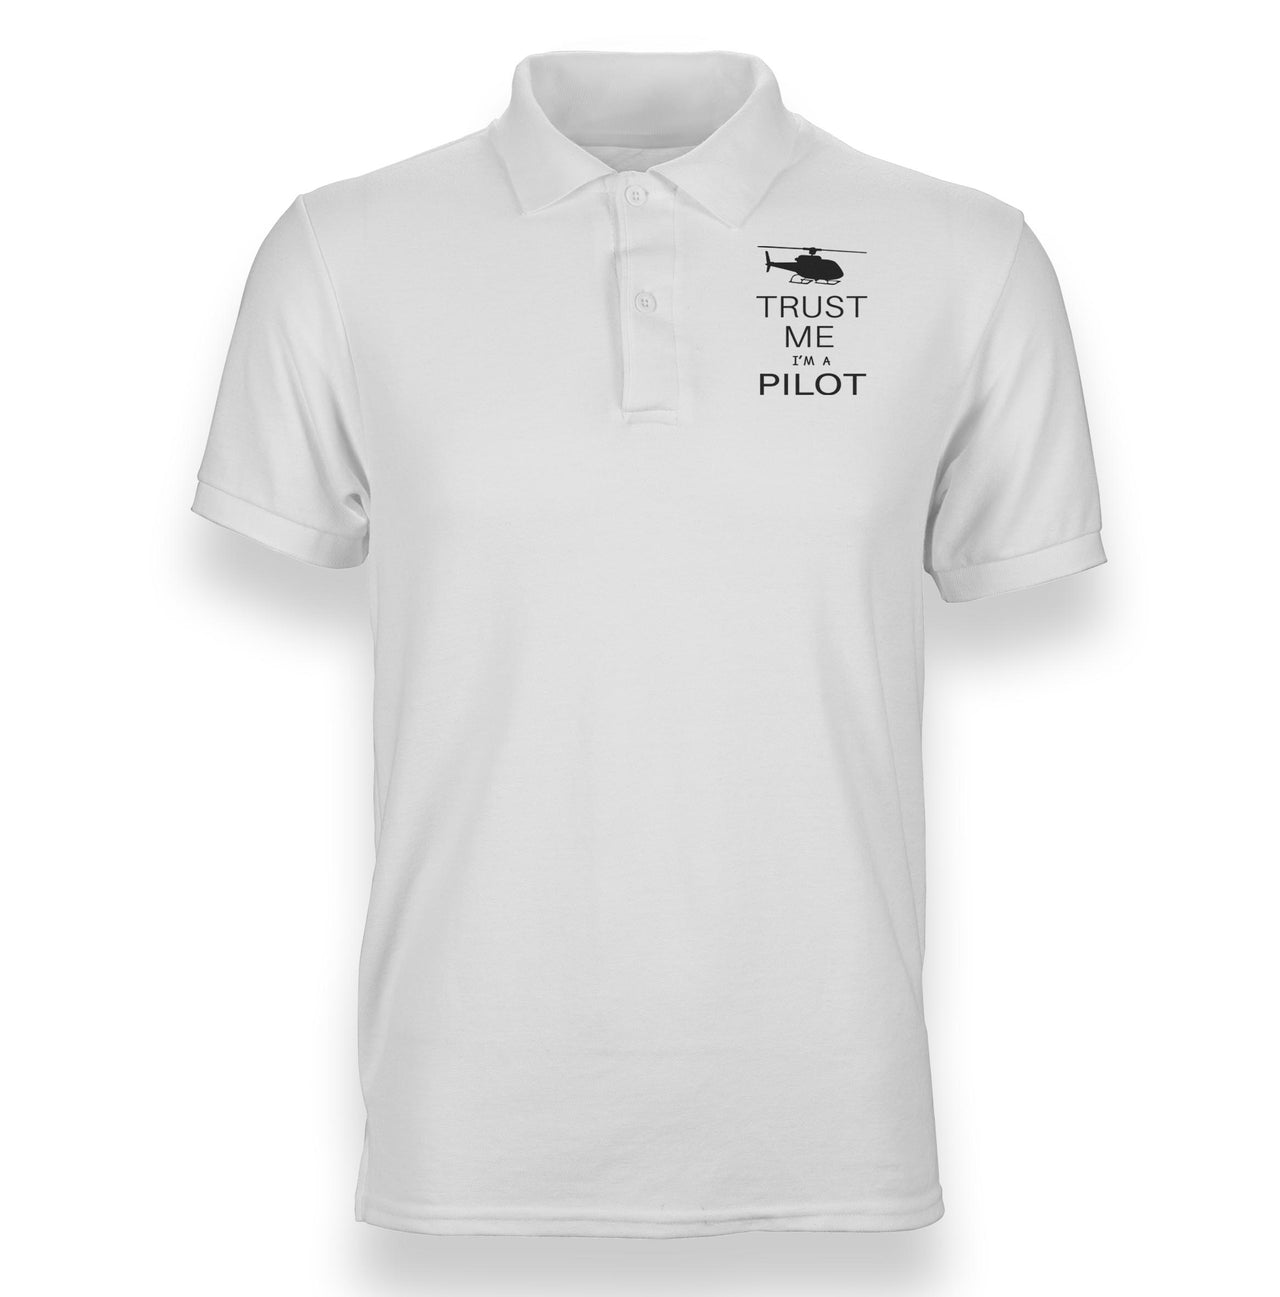 Trust Me I'm a Pilot (Helicopter) Designed Polo T-Shirts